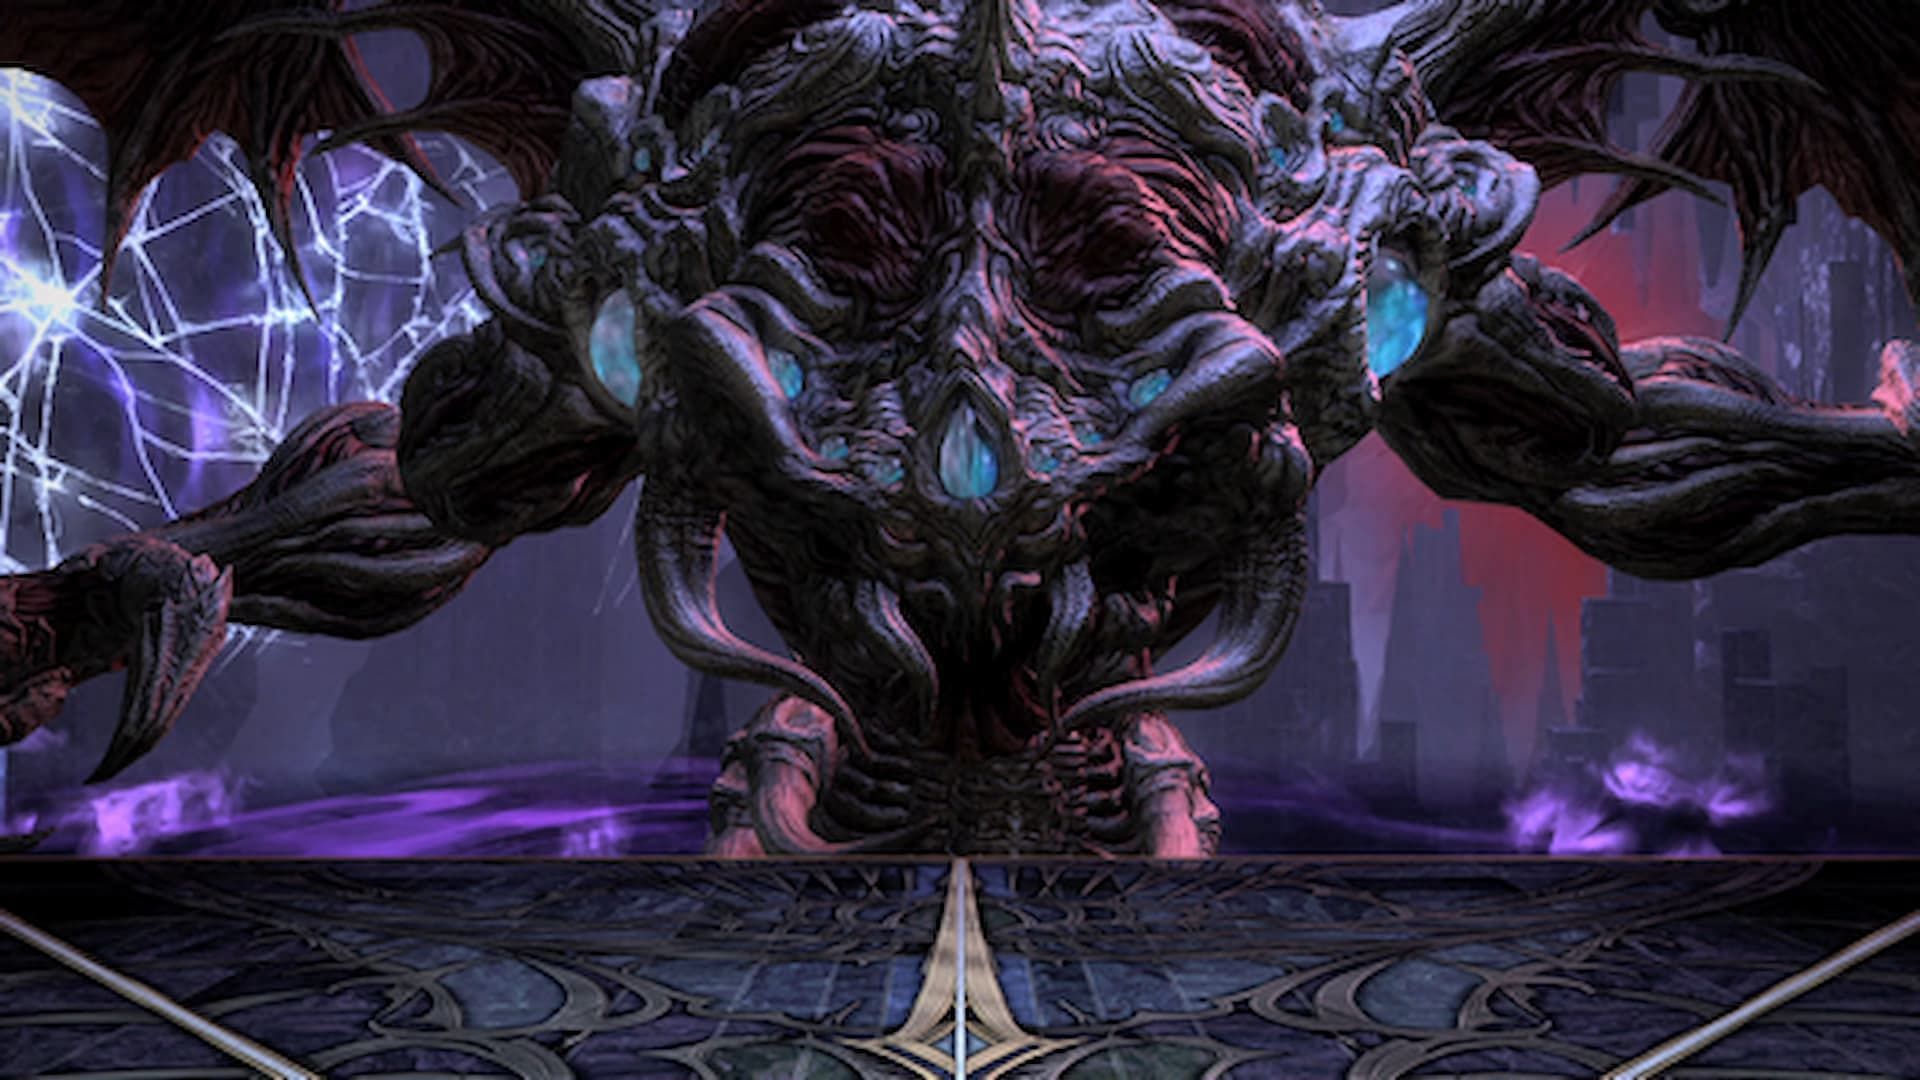 The Abyssal Fracture (Extreme) can be unlocked after progressing further in the main story quest. (Image via Square Enix)